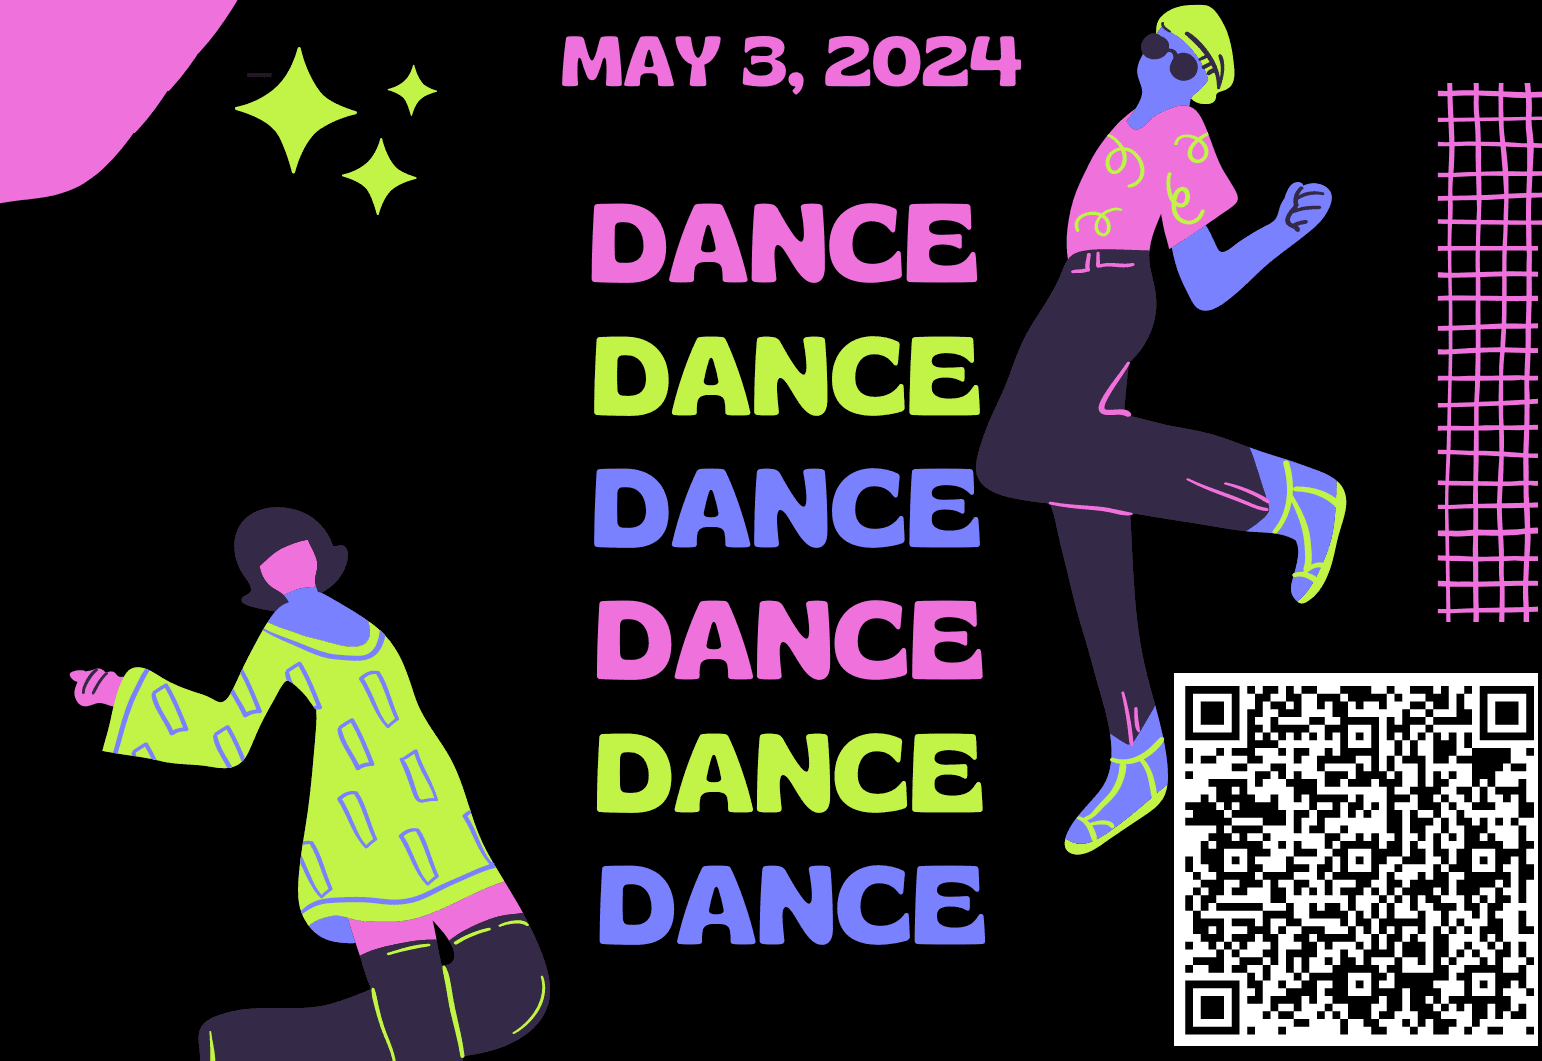 Spring Dance on May 3, 2024 from 7-10 pm in Decker 201. Refreshments will be provided QR code